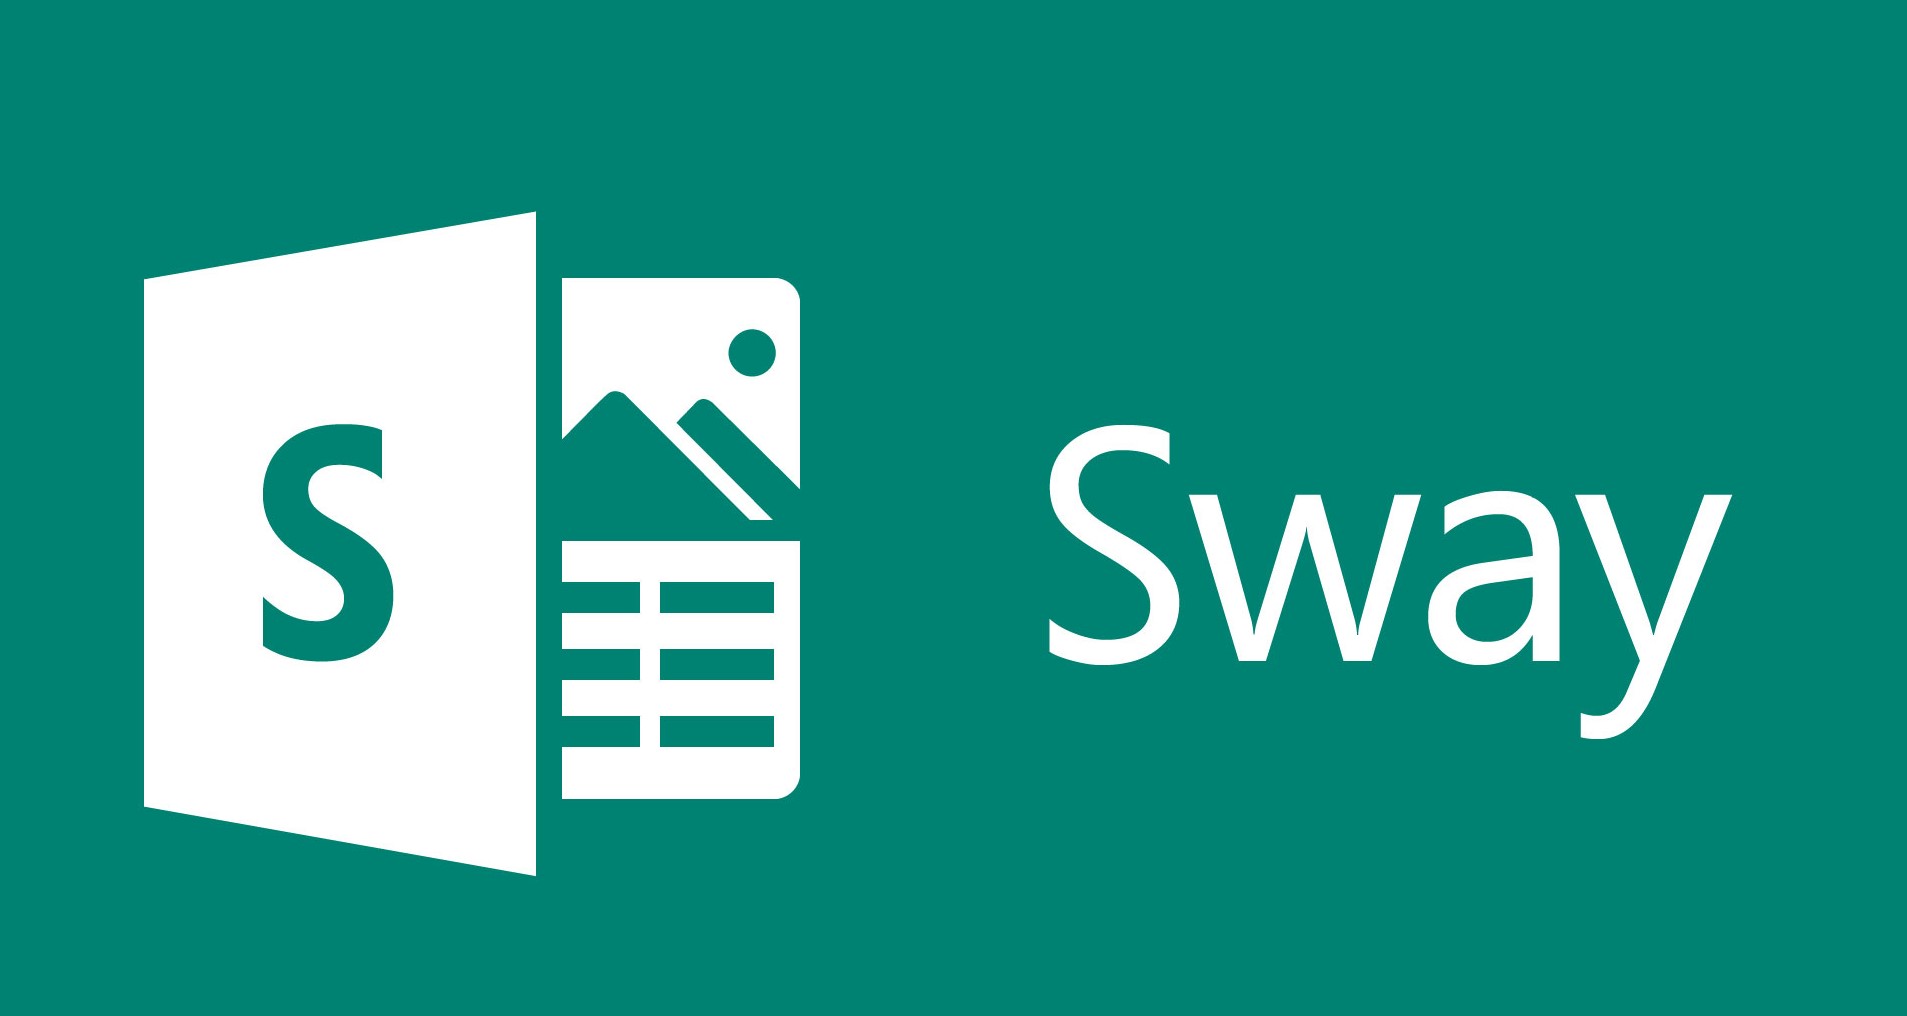 New-Features-Added-to-Sway-for-Office-365-Subscribers.jpg